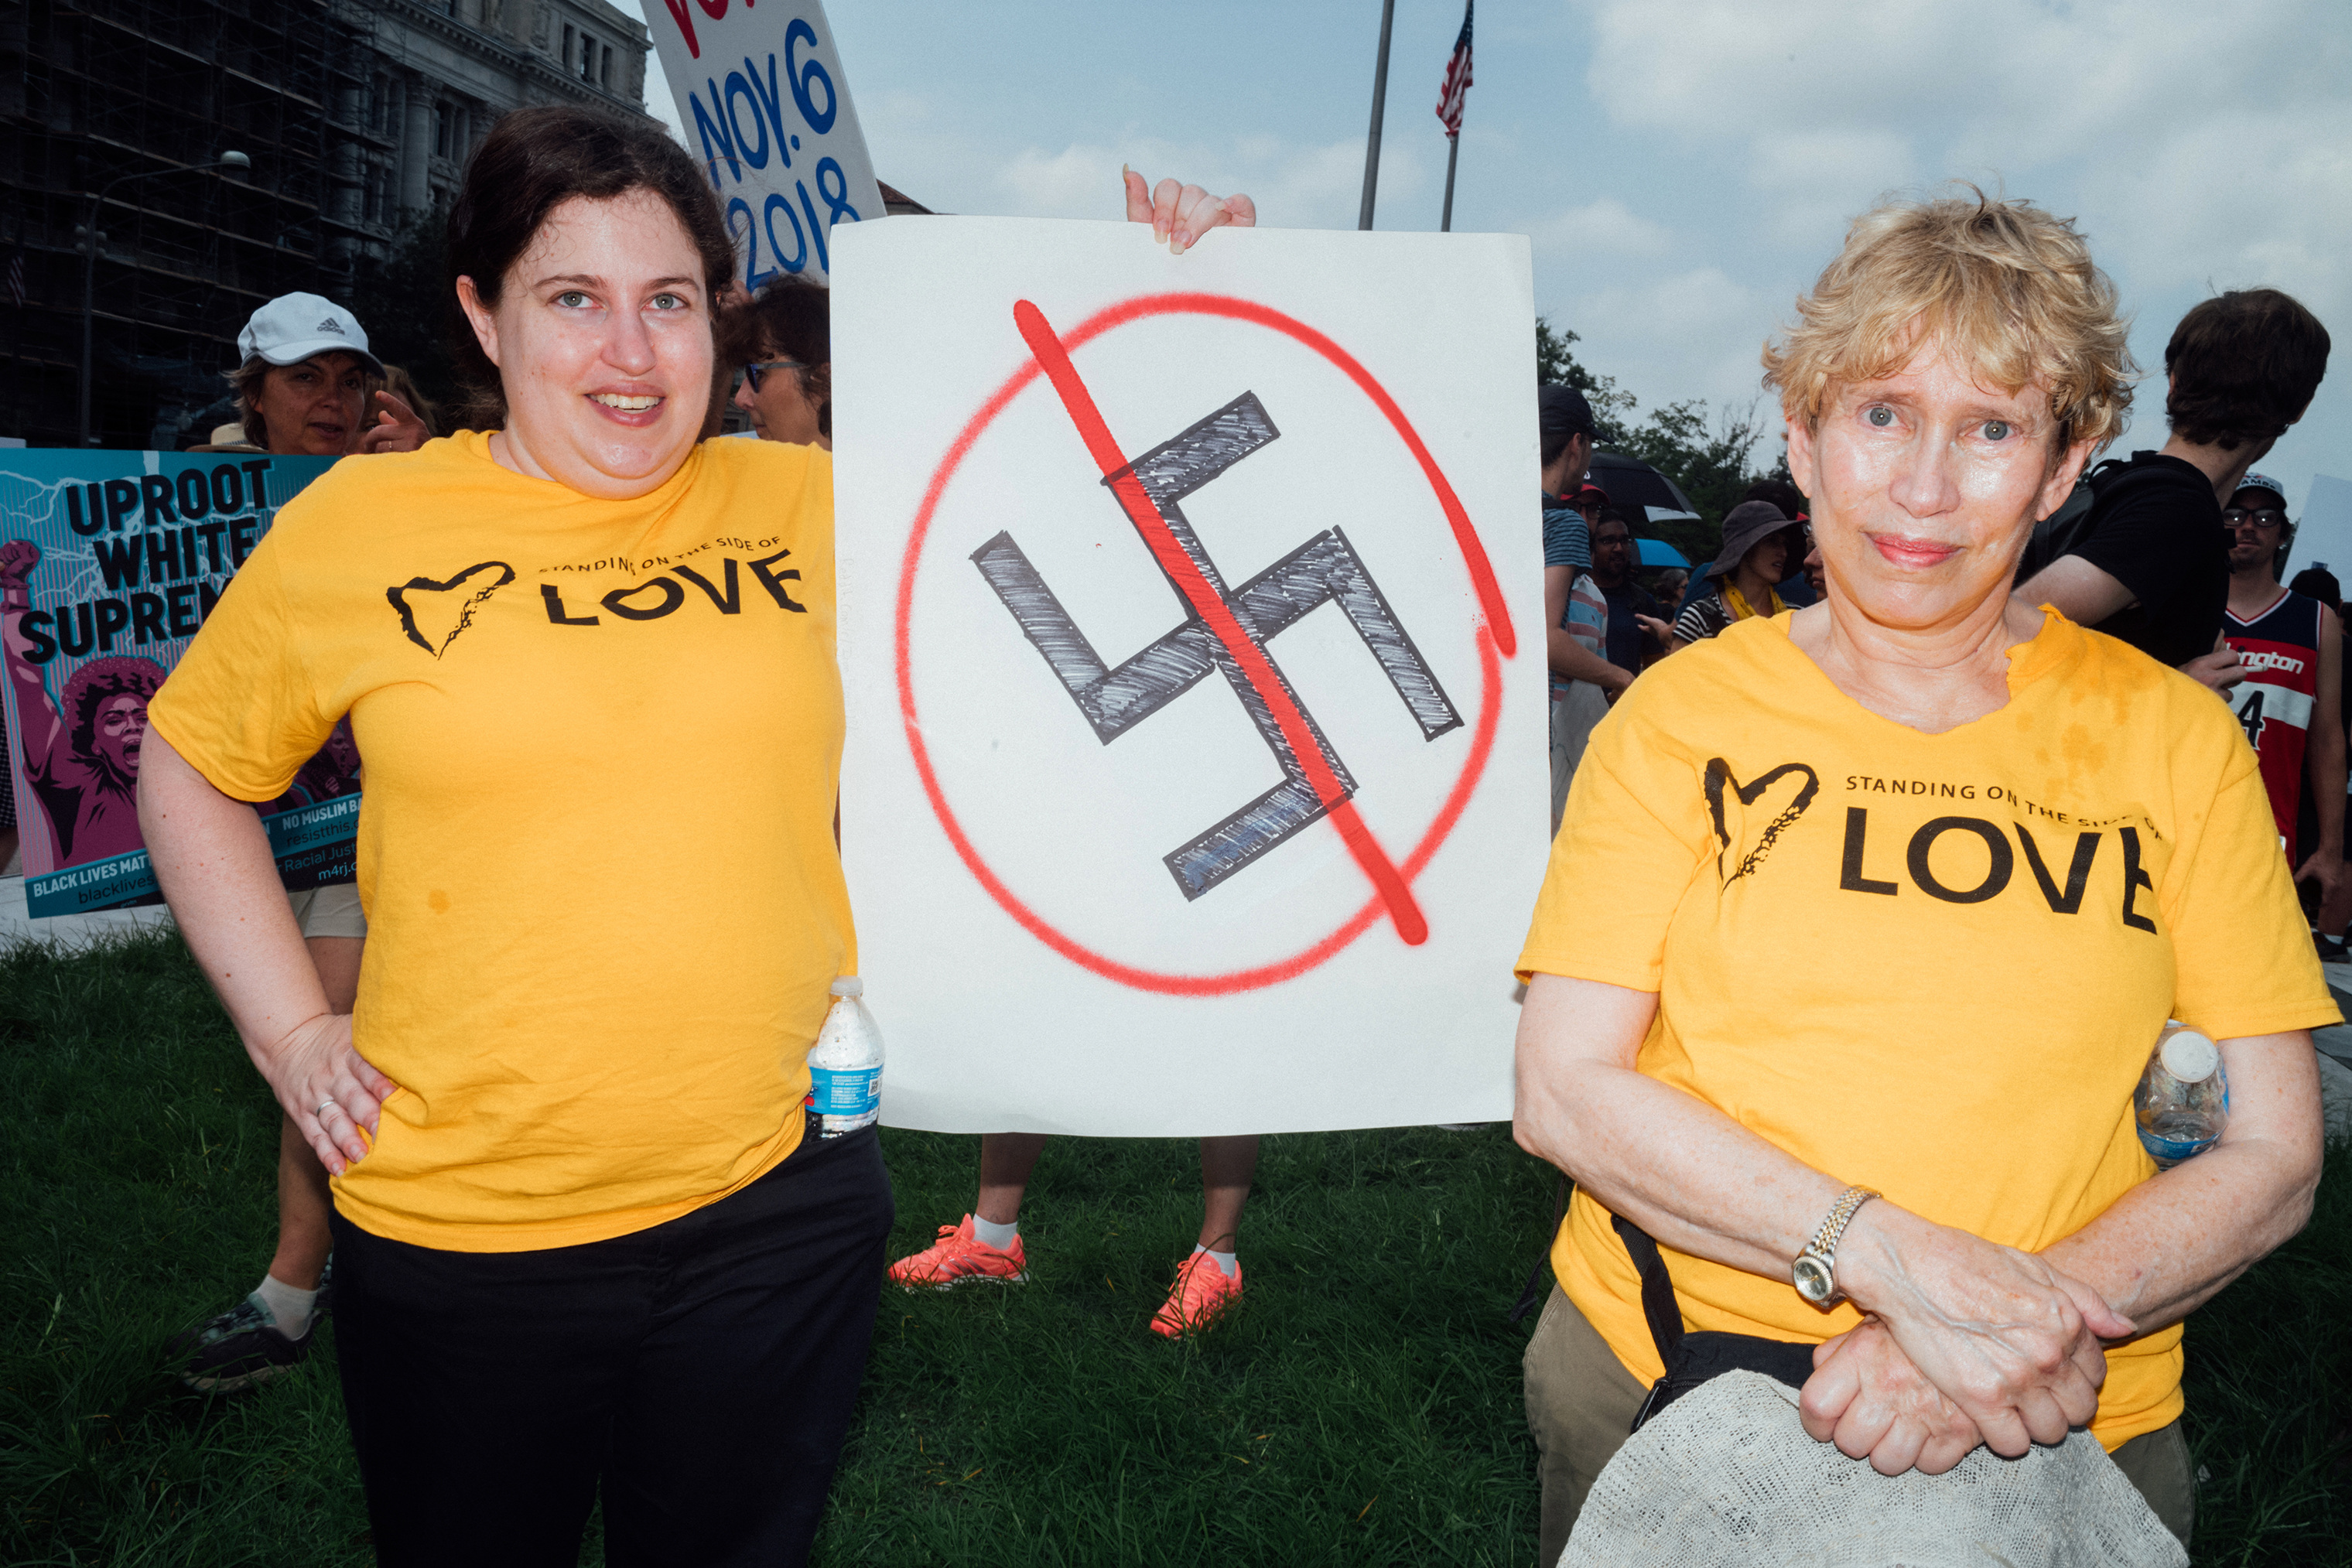 Two counter-protesters attend a demonstration, in opposition of the Unite the Right 2 rally, at Freedom Plaza. (Daniel Arnold for TIME)